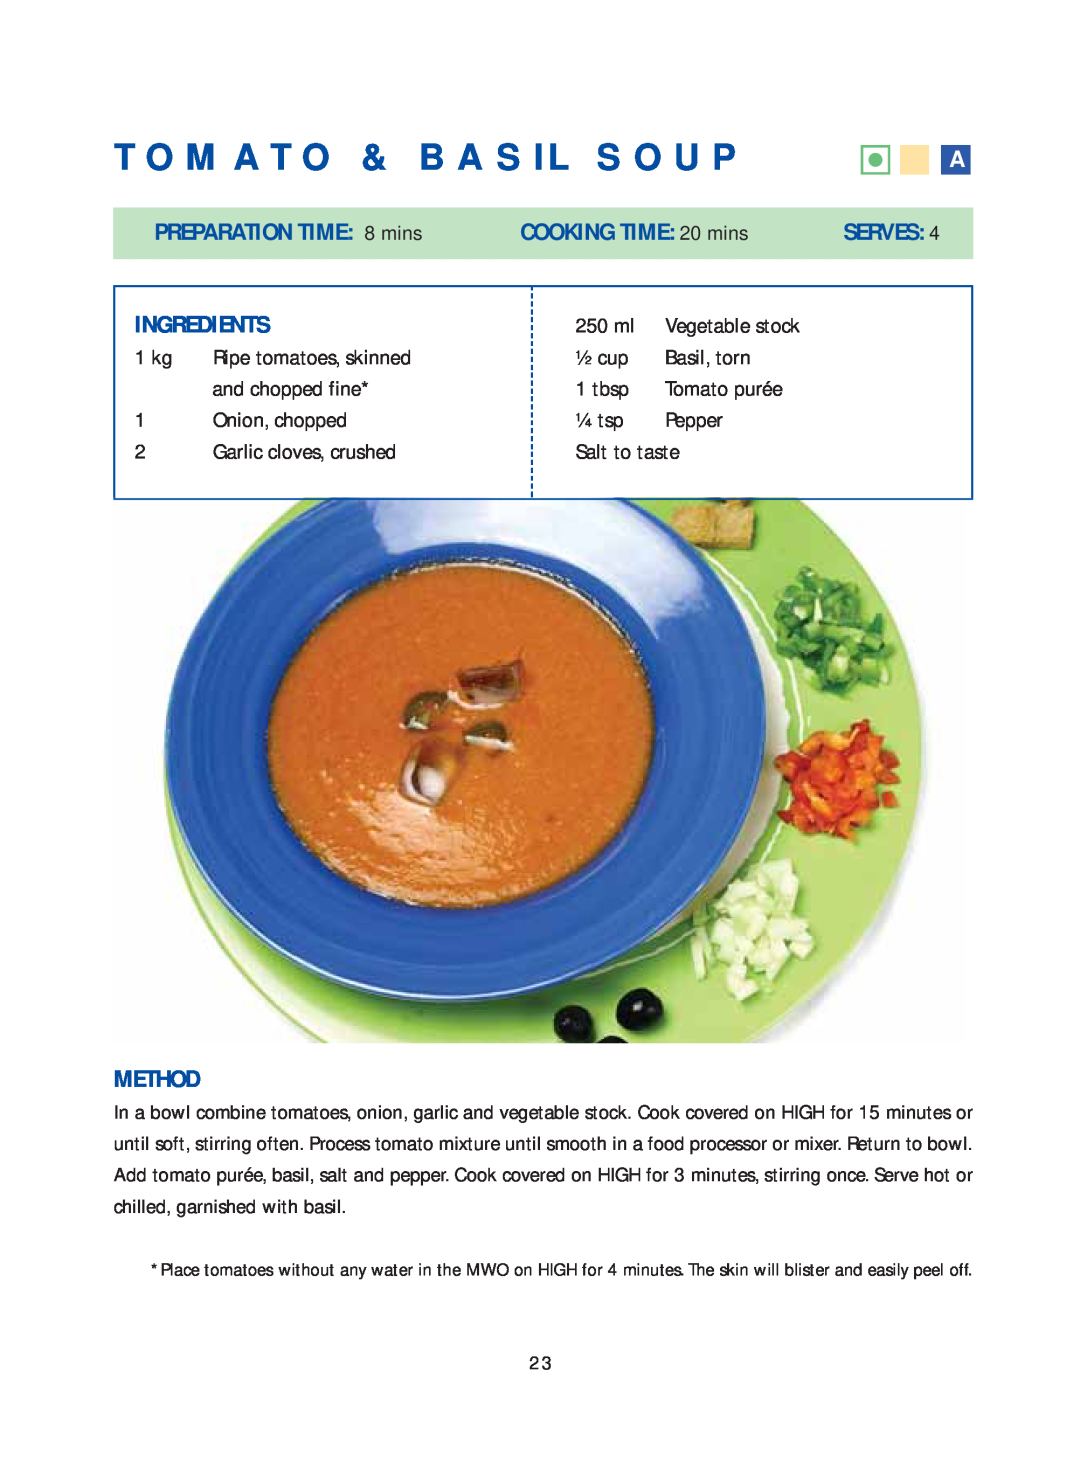 Samsung Microwave Oven Tomato & Basil Soup, PREPARATION TIME: 8 mins, COOKING TIME 20 mins, Serves, Ingredients, Method 